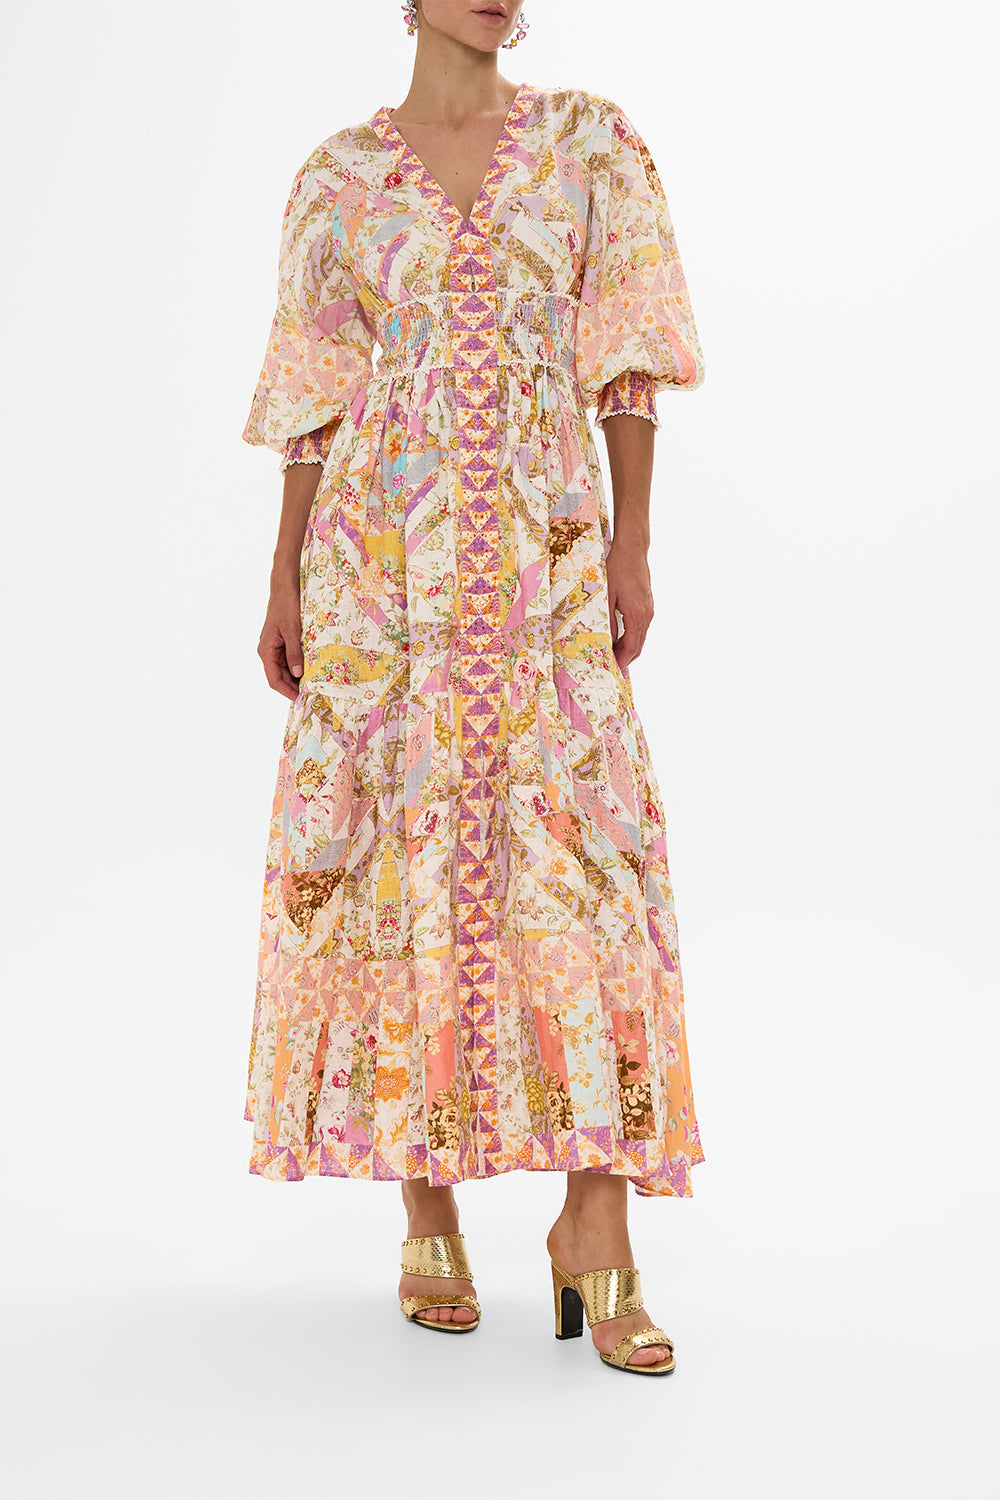 CAMILLA retro floral shirred waistband long dress in Sew Yesterday print.